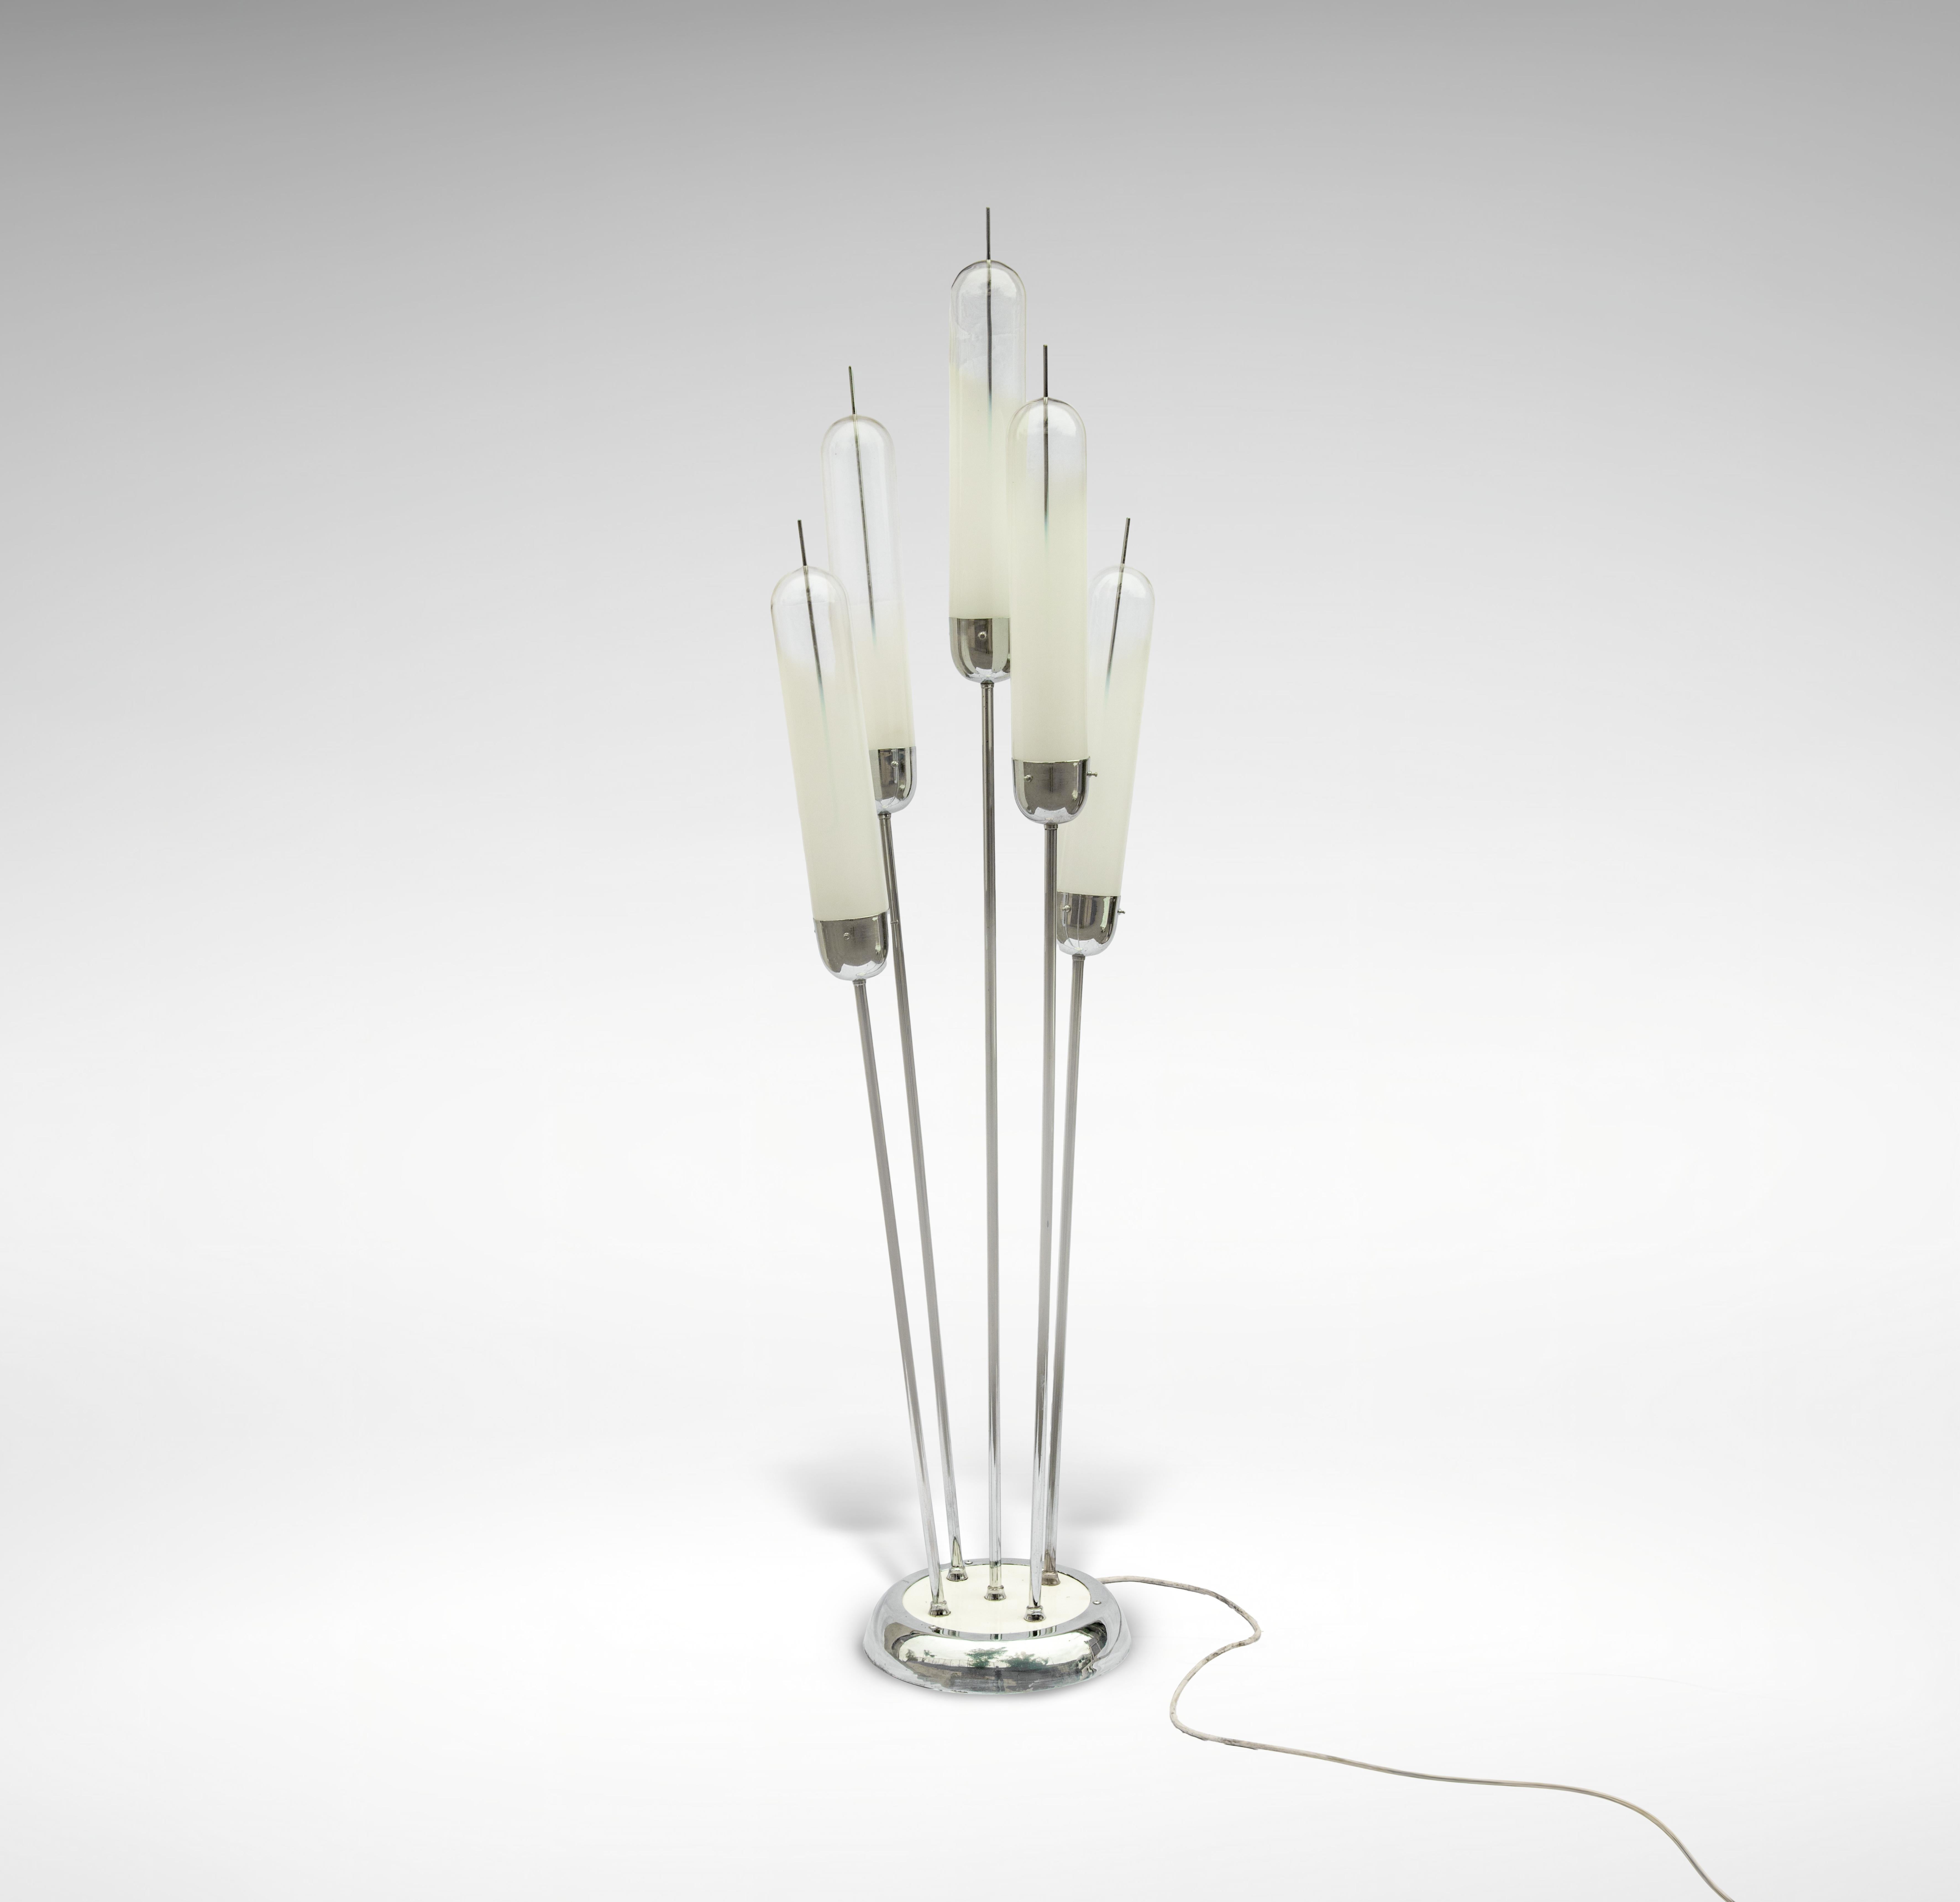 This Reggiani floor lamp is an elegant design lamp designed by Goffredo Reggiani.

With five Murano glass lightbulbs.

Very good condition.

Not much information is available on the biography of the Italian lighting designer Goffredo Reggiani, but